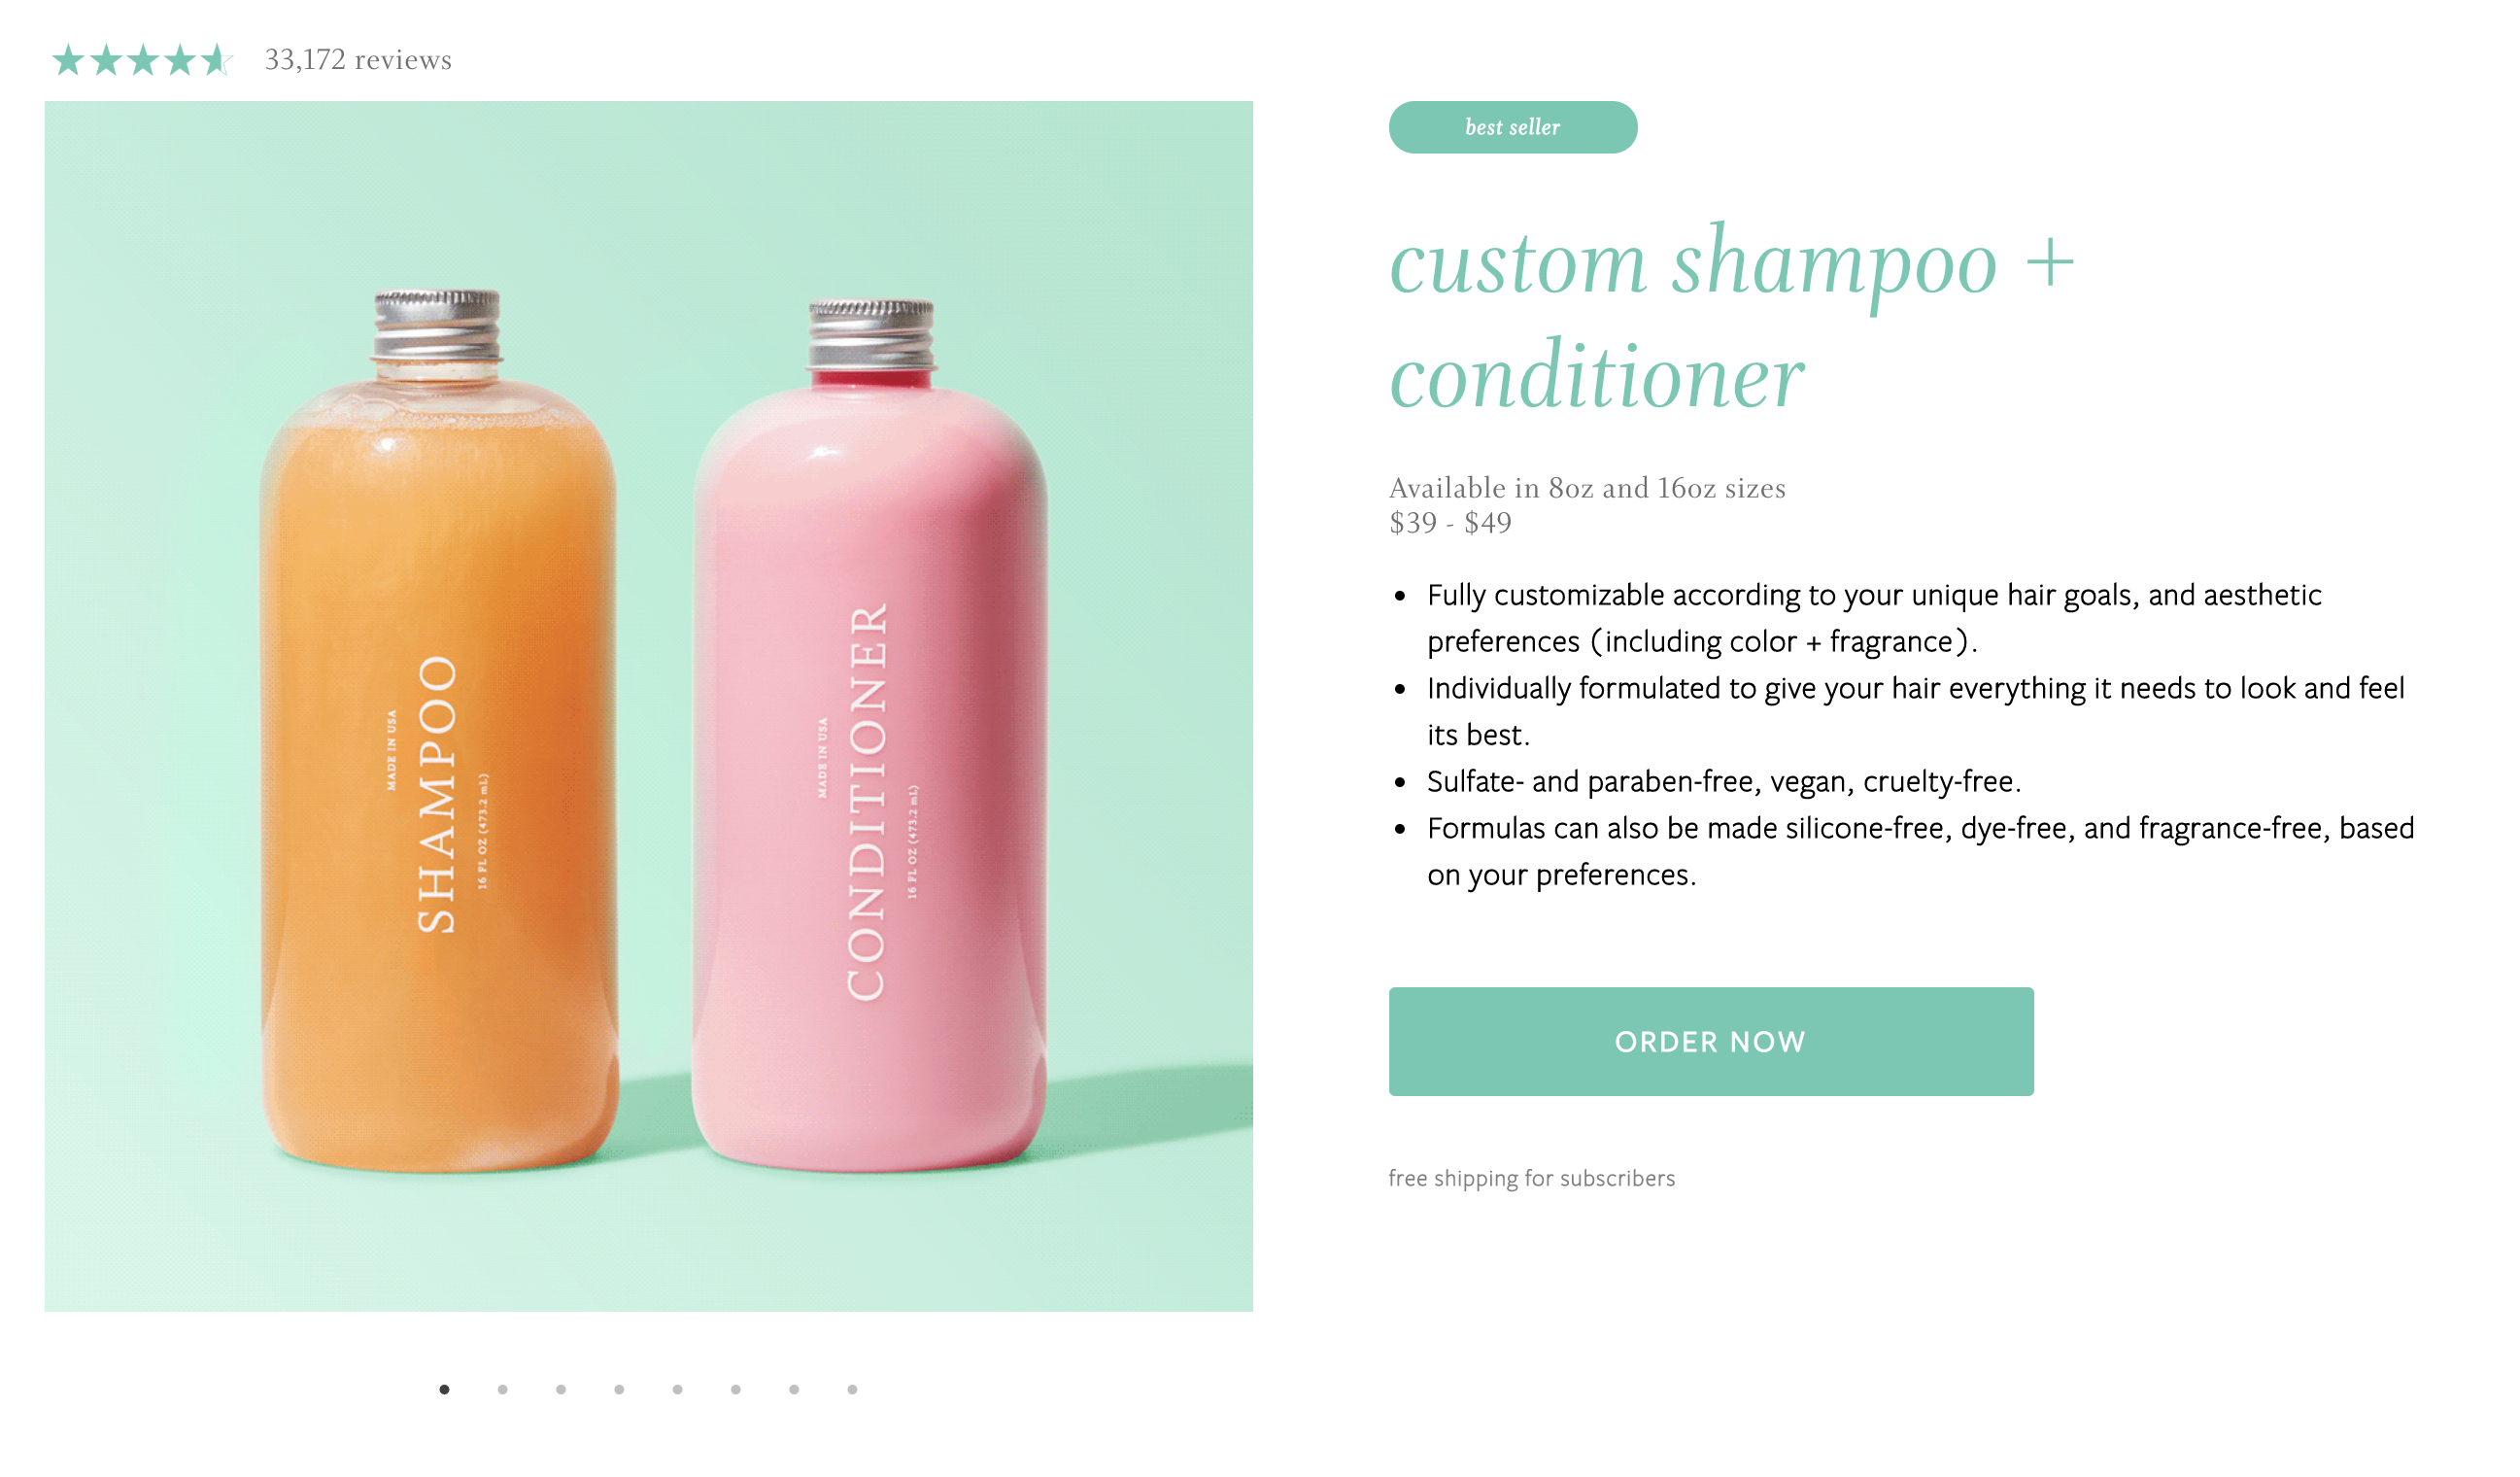 Function of Beauty’s custom shampoo and conditioner product detail page.